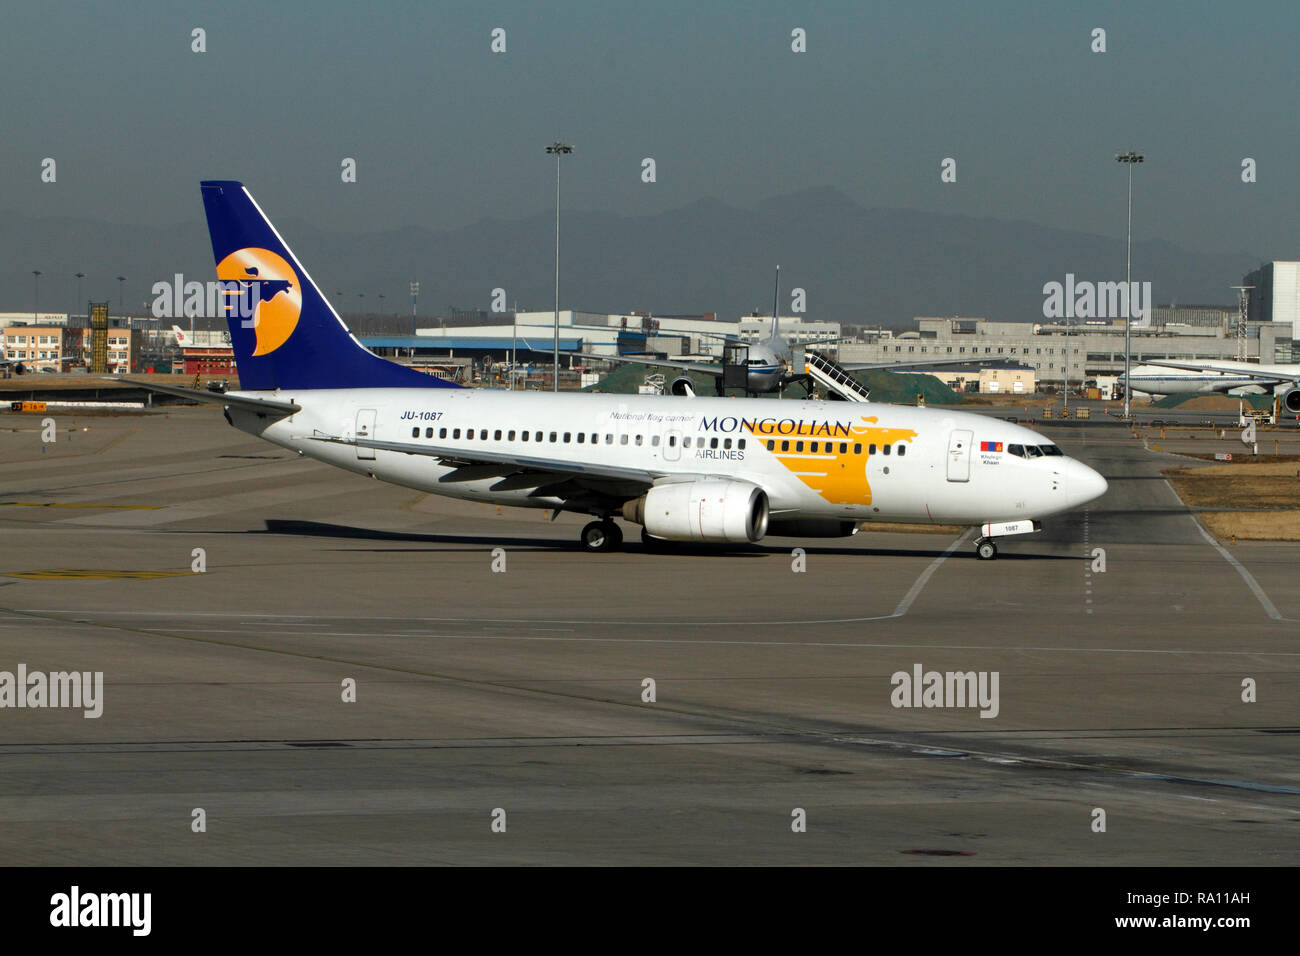 Boeing 737-700, National flag carrier, Mongolian Ailrlines. Pushing off at Beijing Capital International Airport, China. Stock Photo